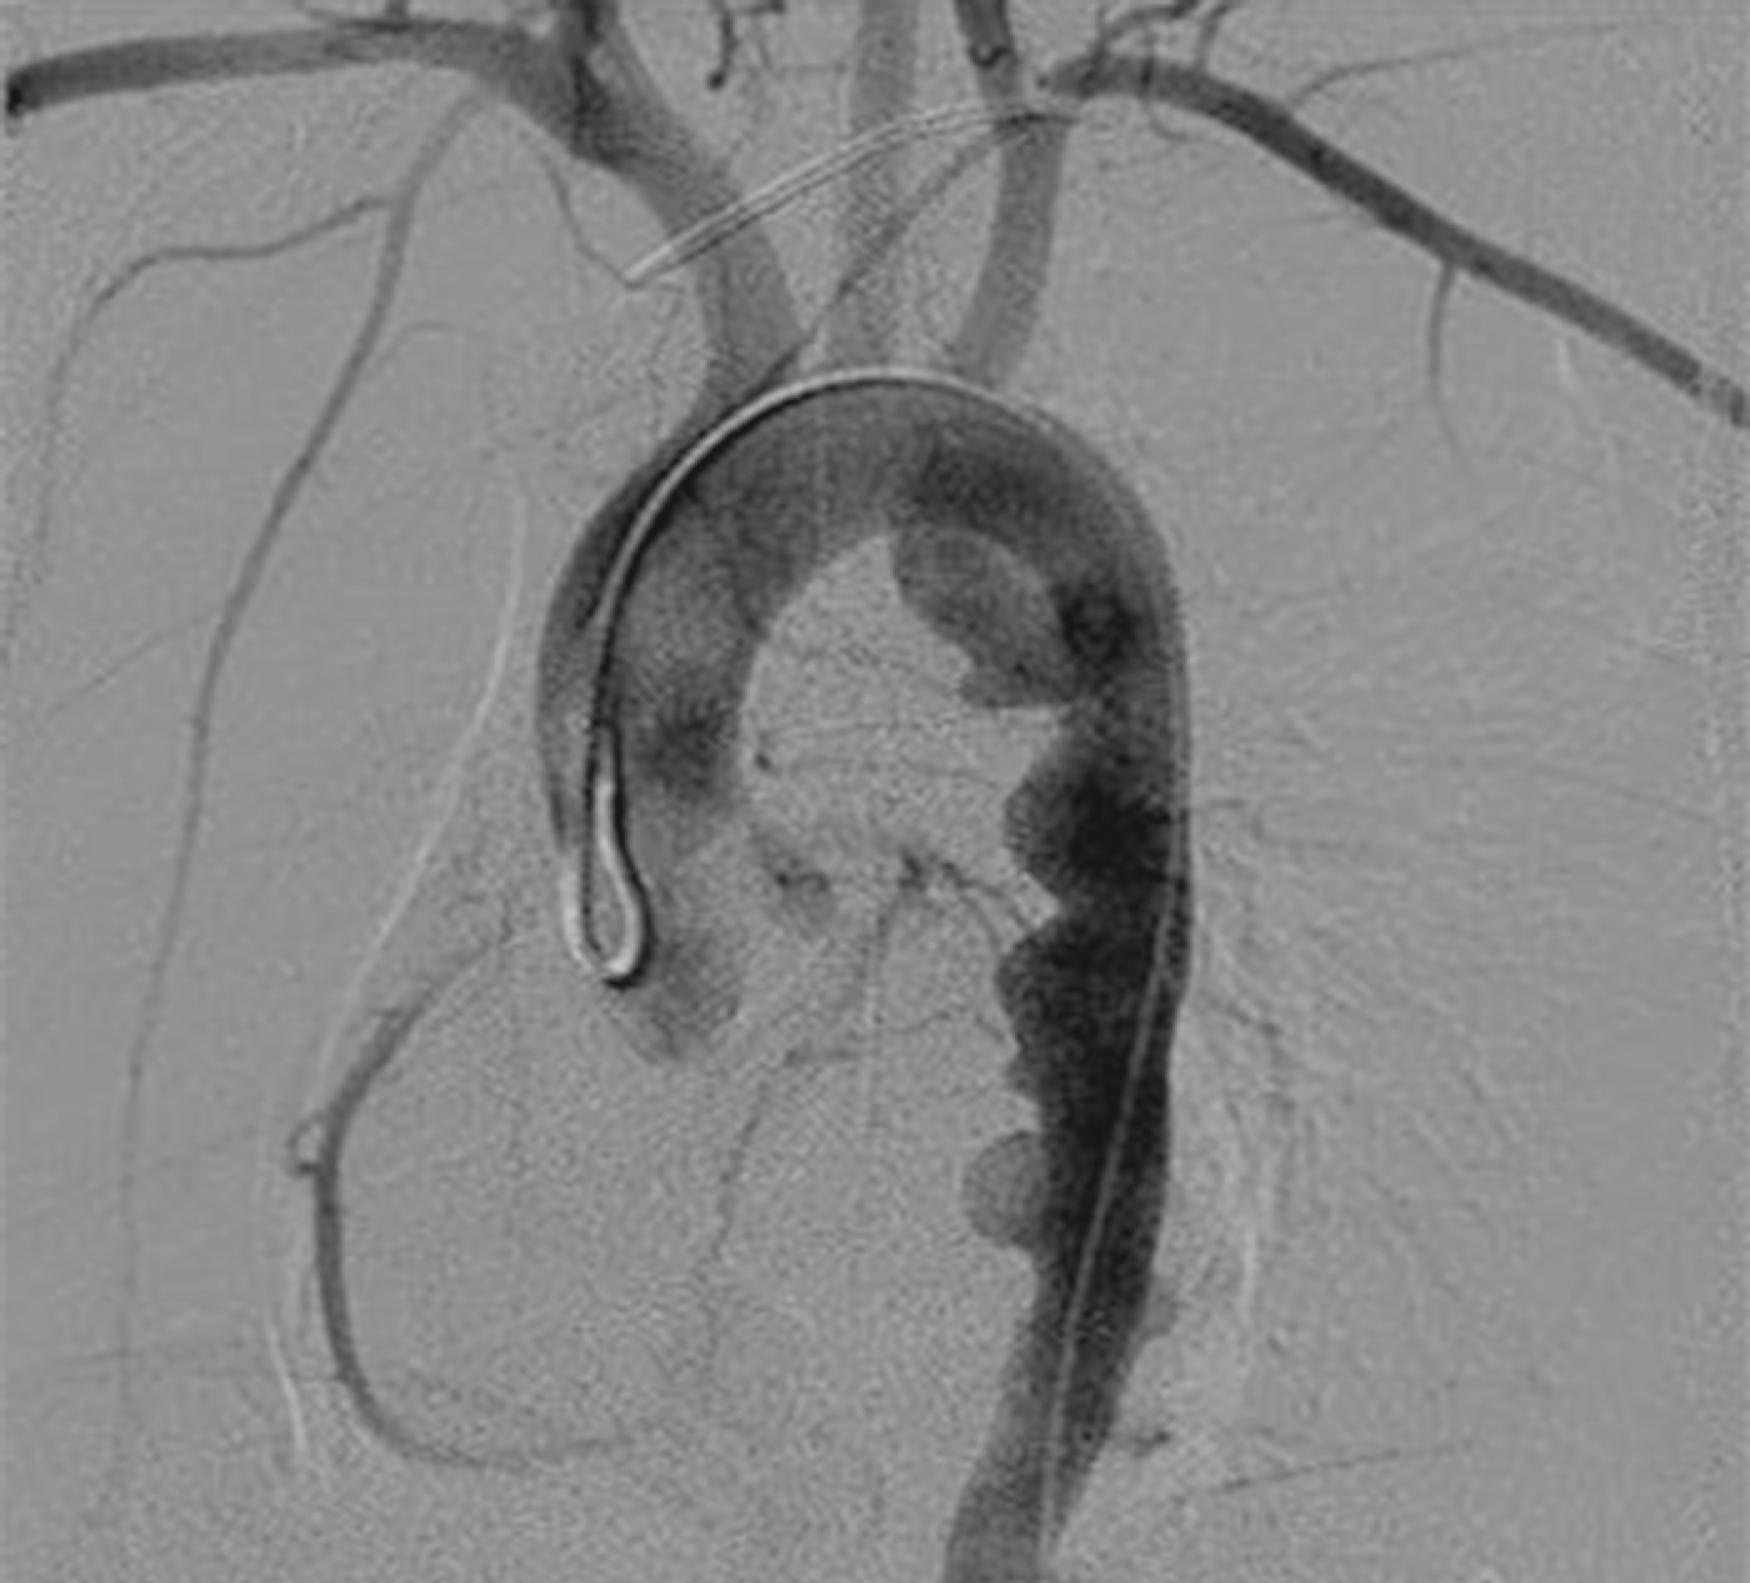 Figure 186.1, Multiple saccular aortic aneurysms along the anteromedial aspect of the descending thoracic aorta in a 5-year-old with tuberous sclerosis.